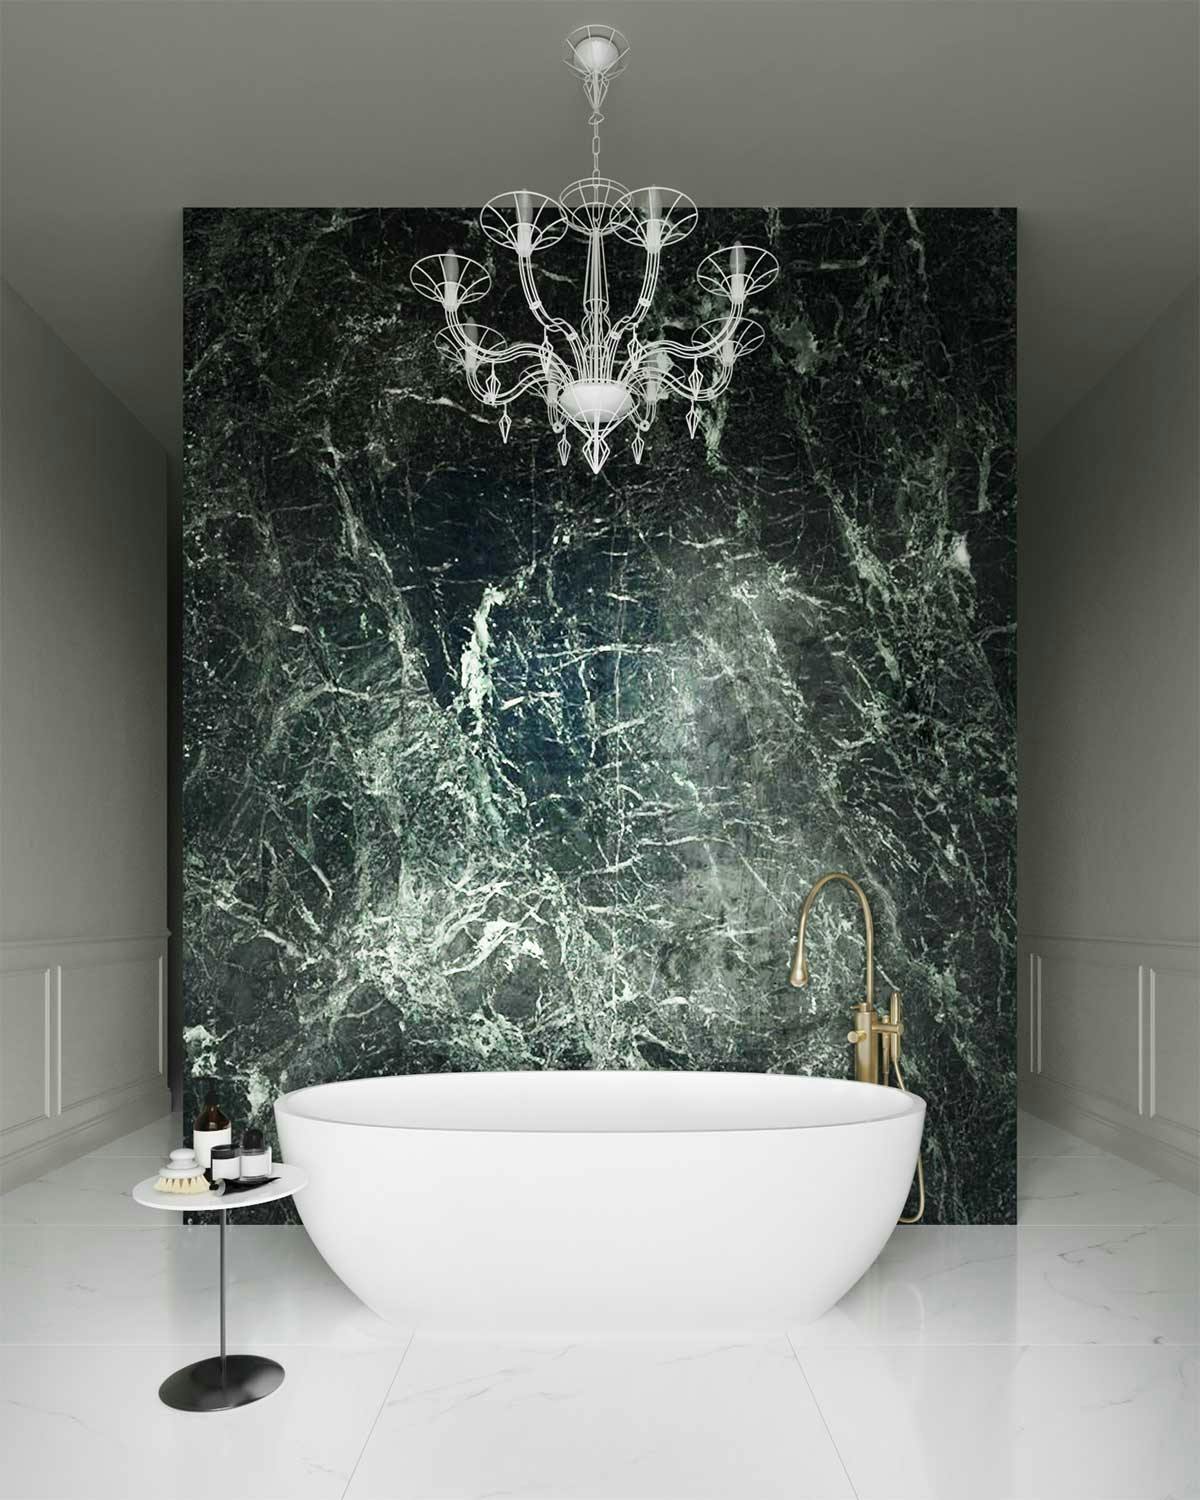 3D real estate Visualization of the interior with the interior design concept of a master bathroom with a green marble wall in the penthause in a old building in Berlin, Germany.